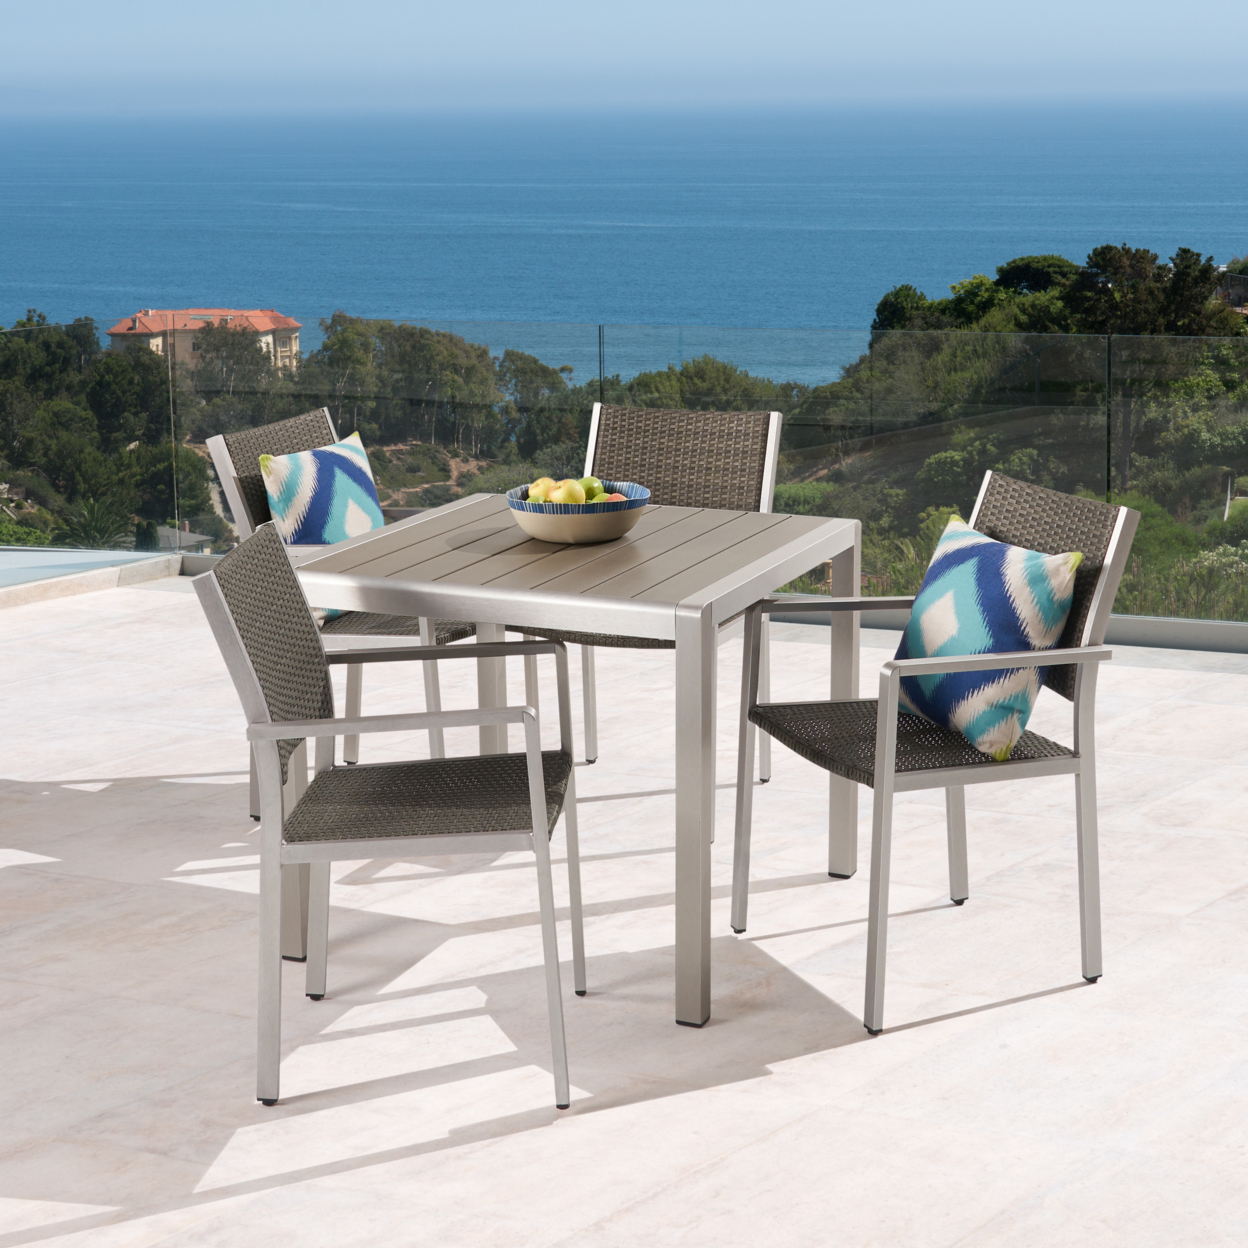 Julia Patio Dining Set - 4-Seater - Anodized Aluminum - Wicker Seats - Polywood Table Top